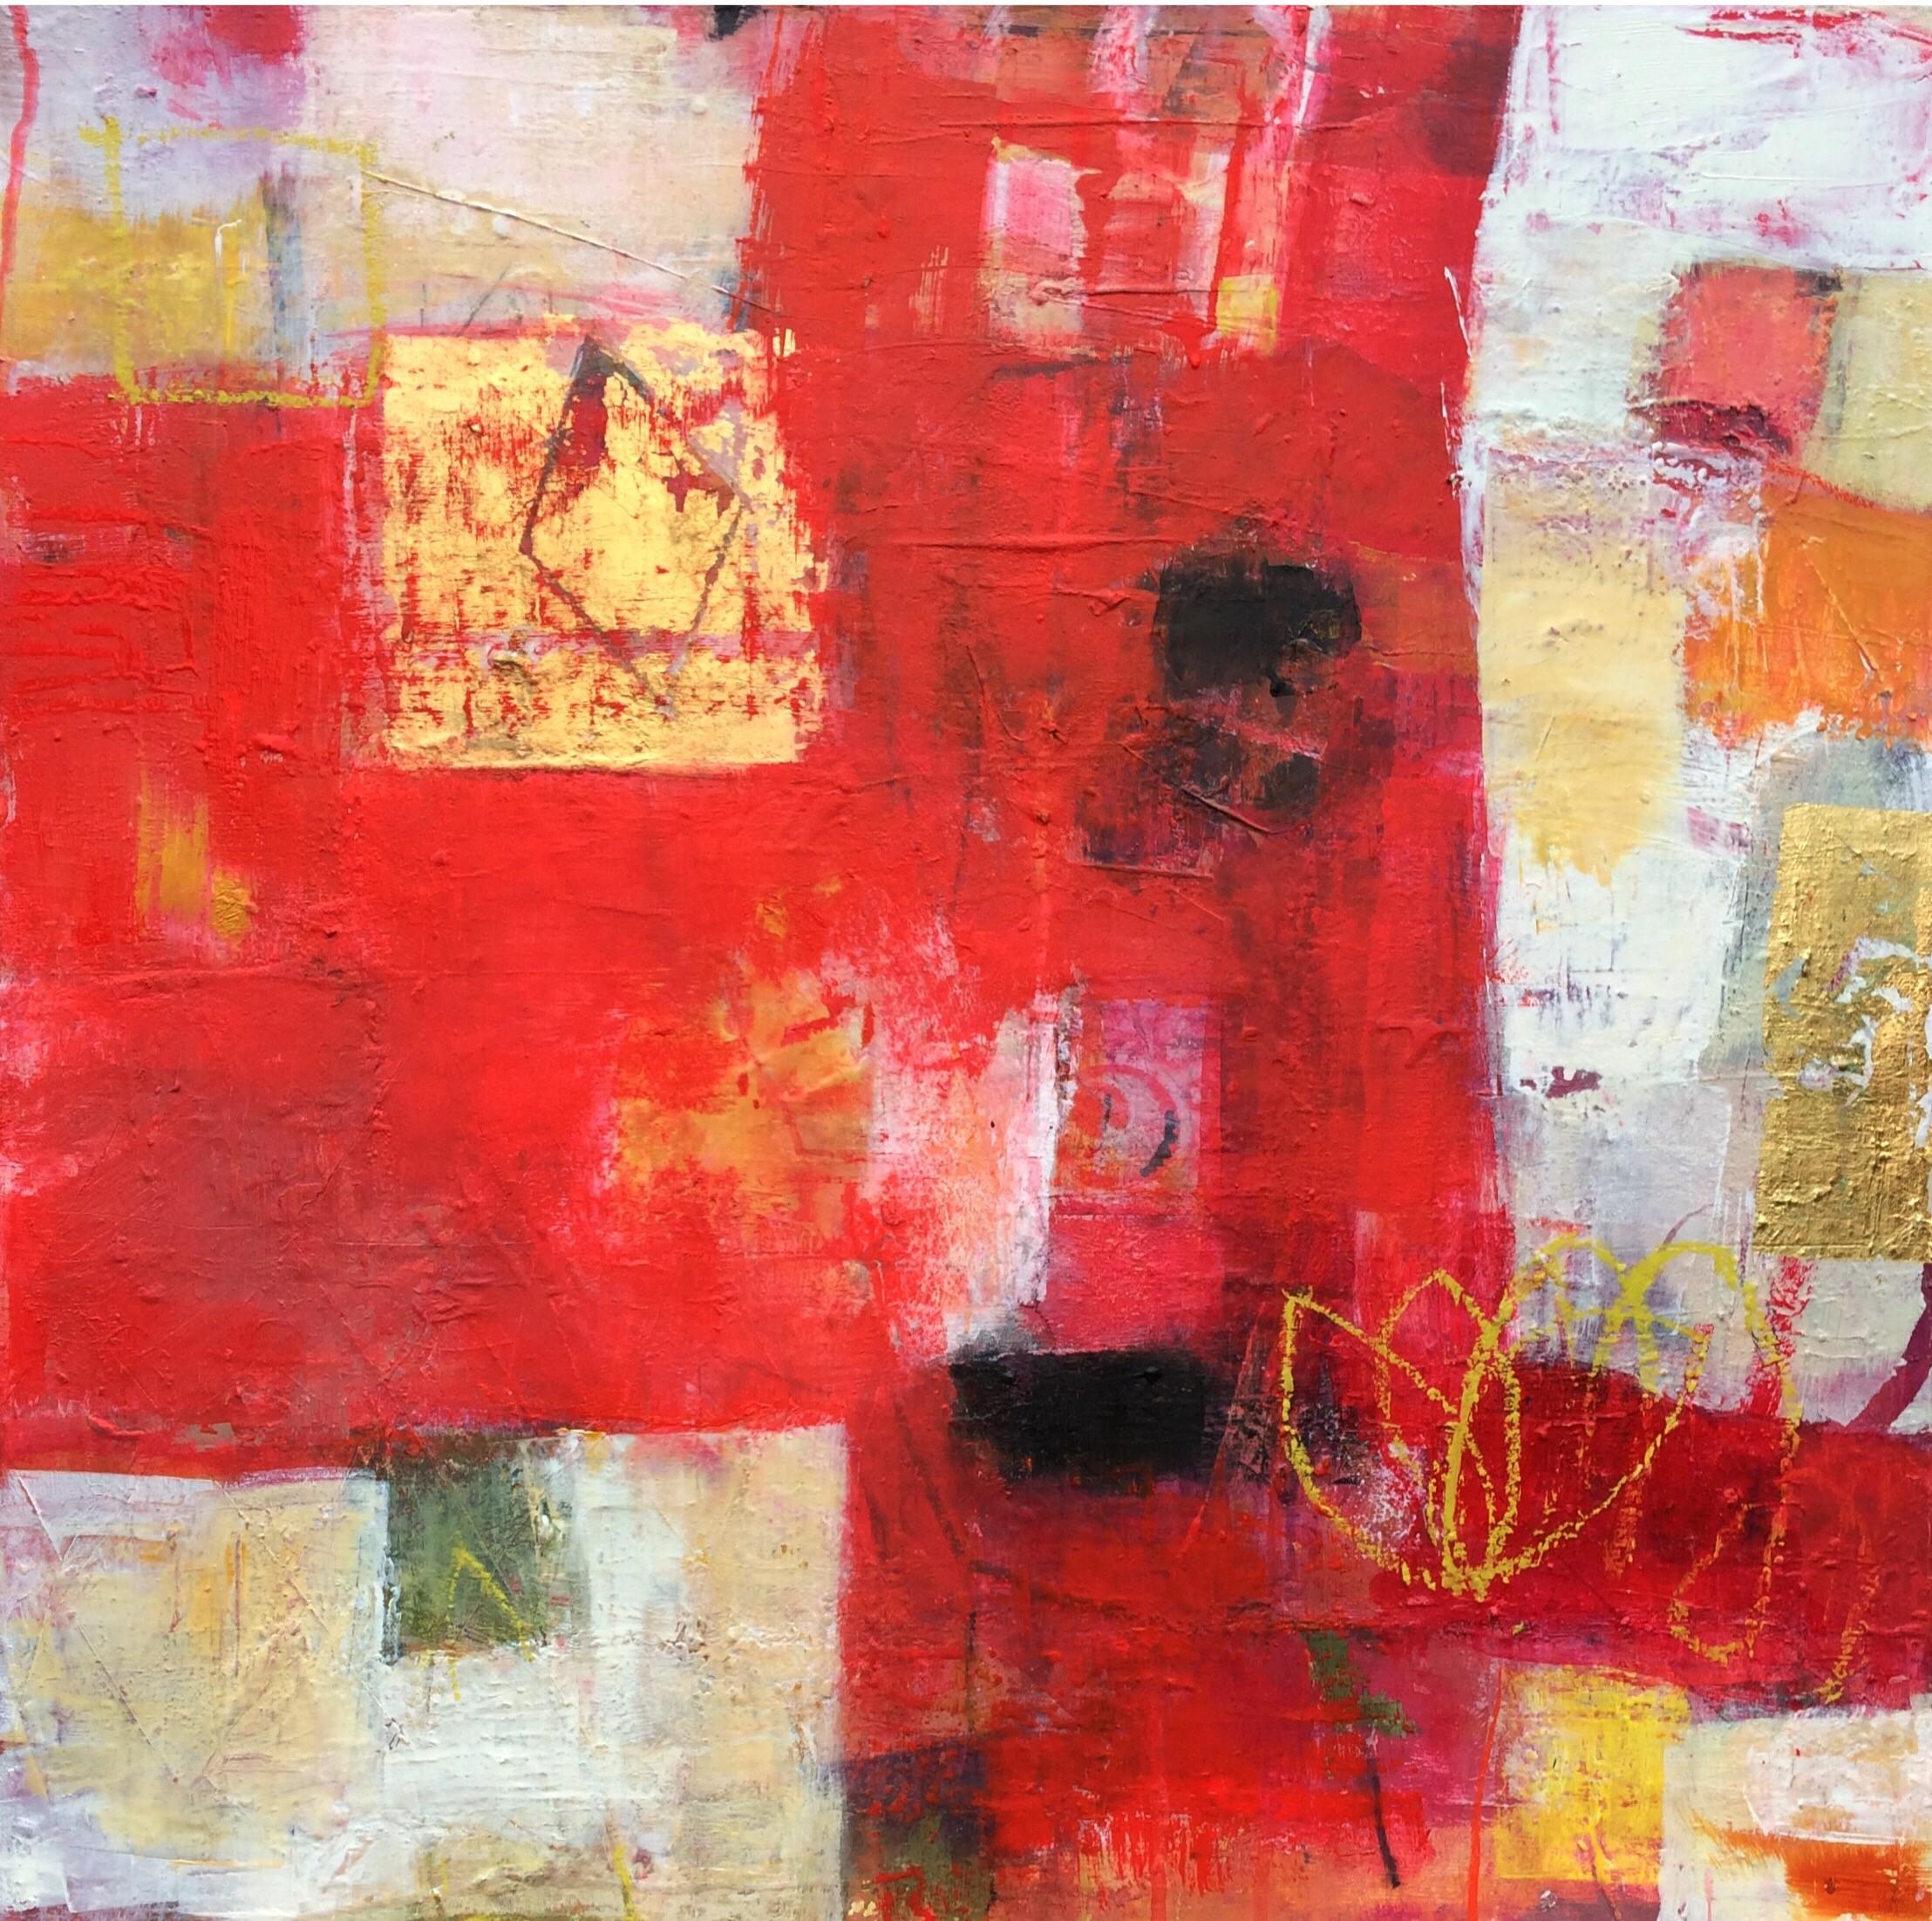 Stopping Awhile, JESSICA BROWN, Original Abstract Painting for Sale, Red Art